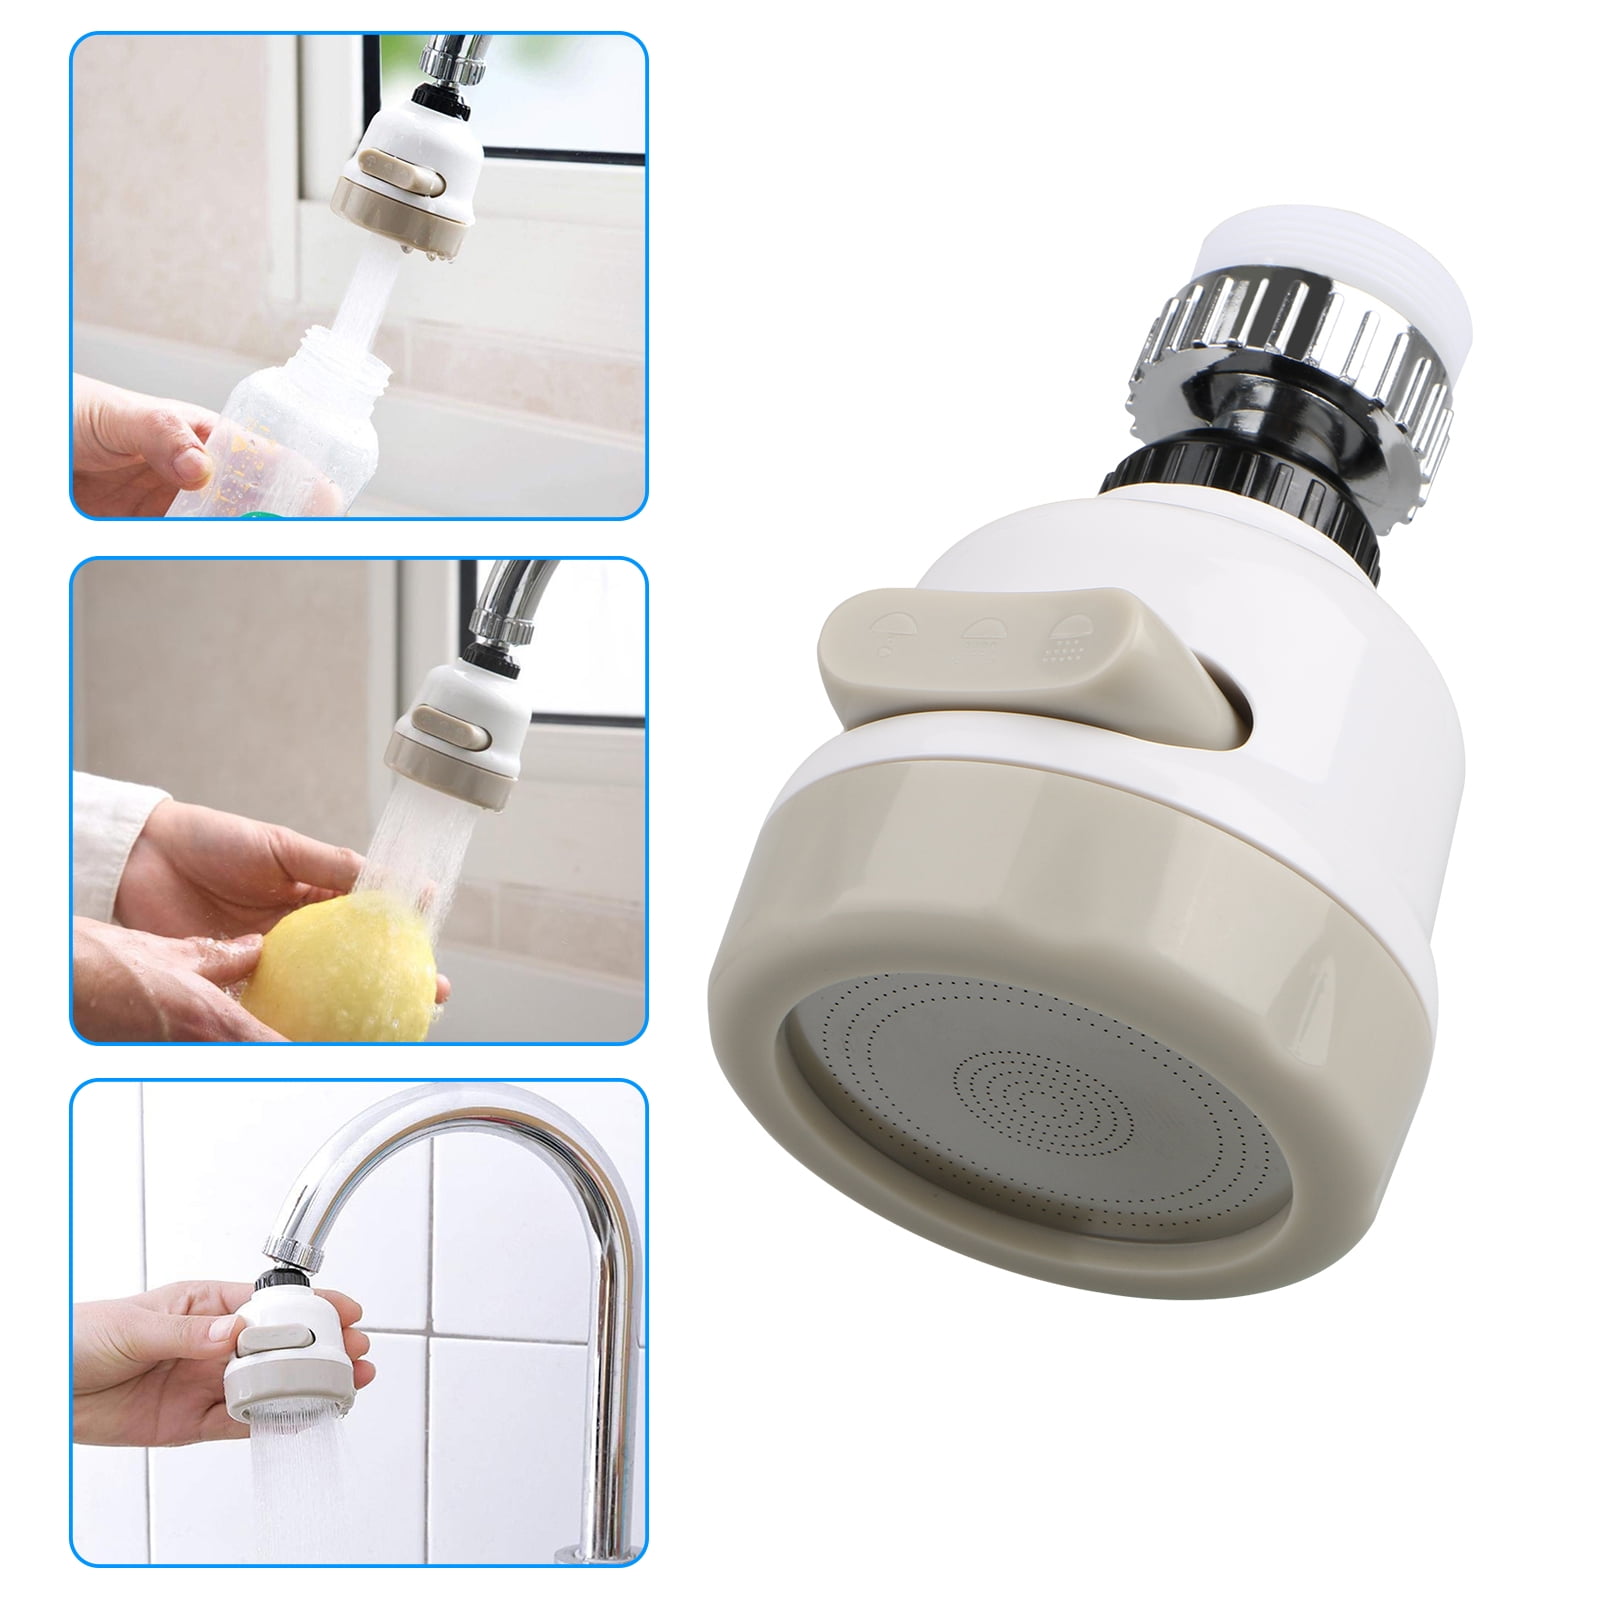 360 DEGREE ROTATING FAUCET Moveable Kitchen Tap Head Water Saving Filter Sprayer